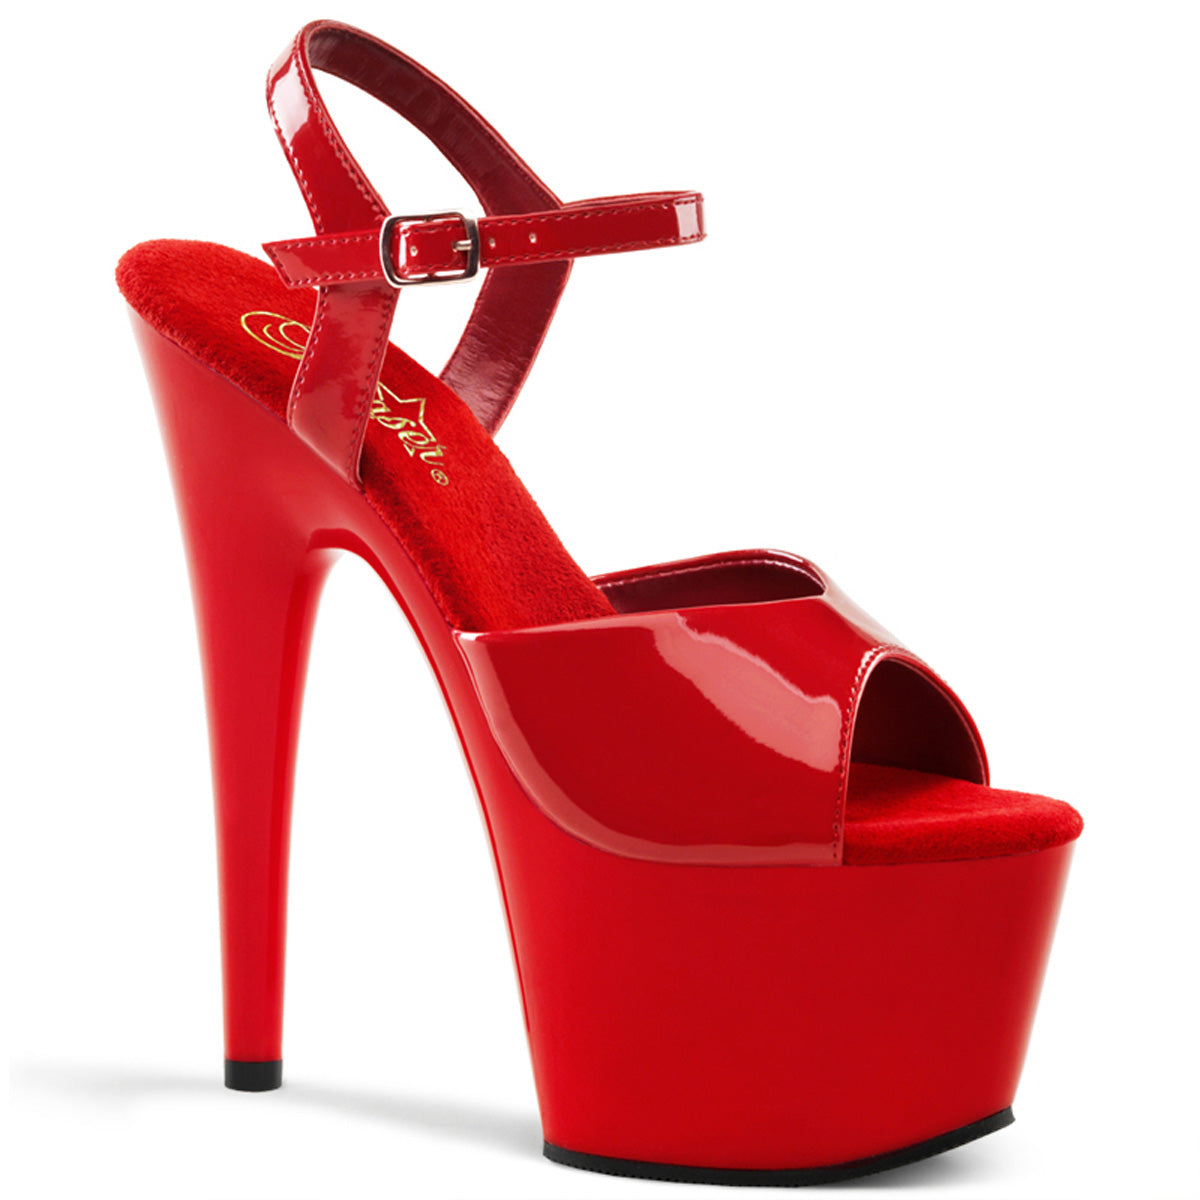 ADORE-709 Pleasers 7 Inch Heel Red Pole Dancing Platforms-Pleaser- Sexy Shoes